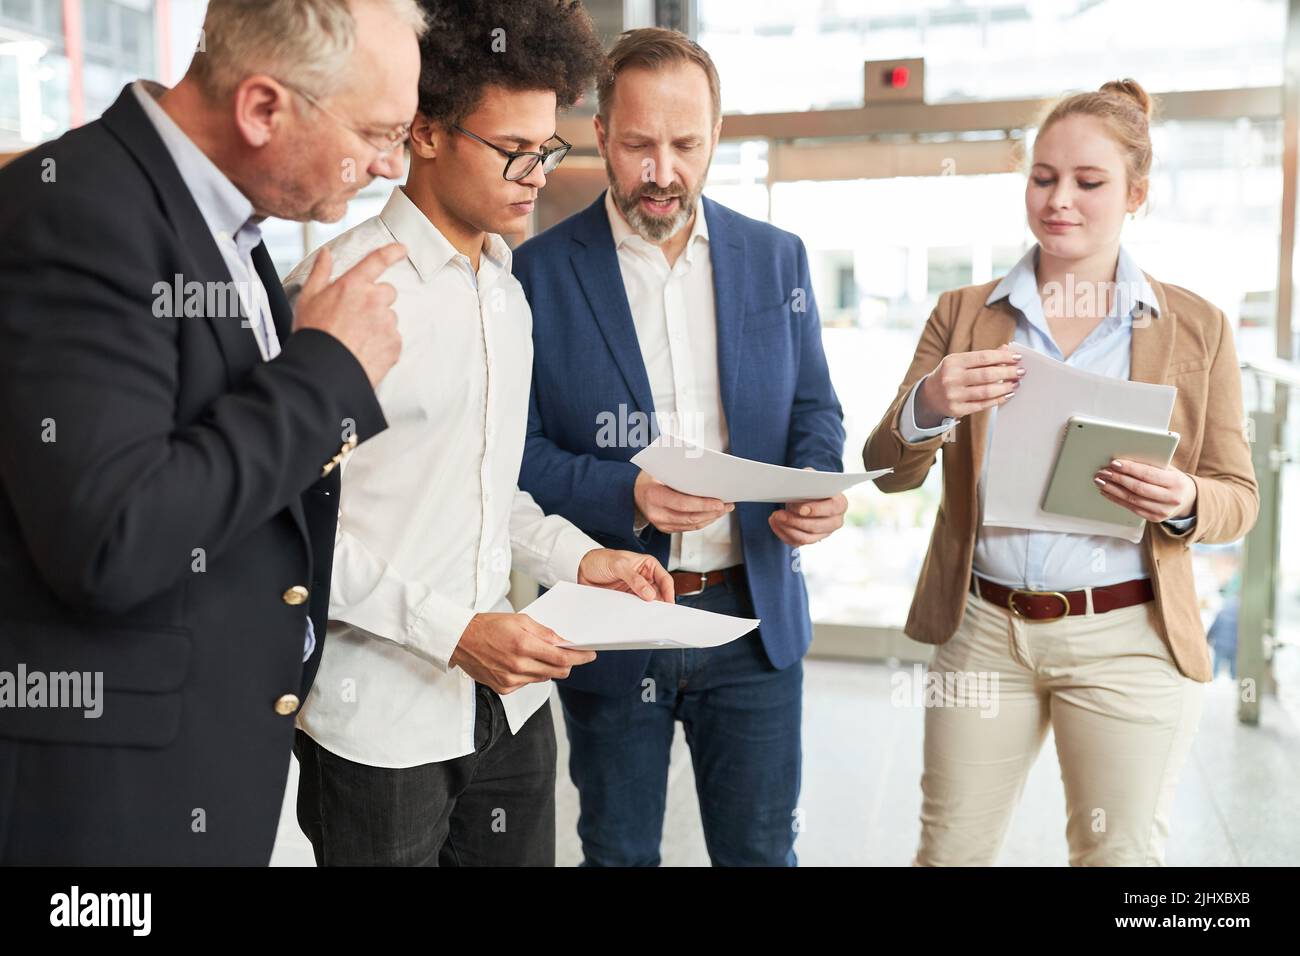 Startup business team and consulting consultants analyzing project documents Stock Photo